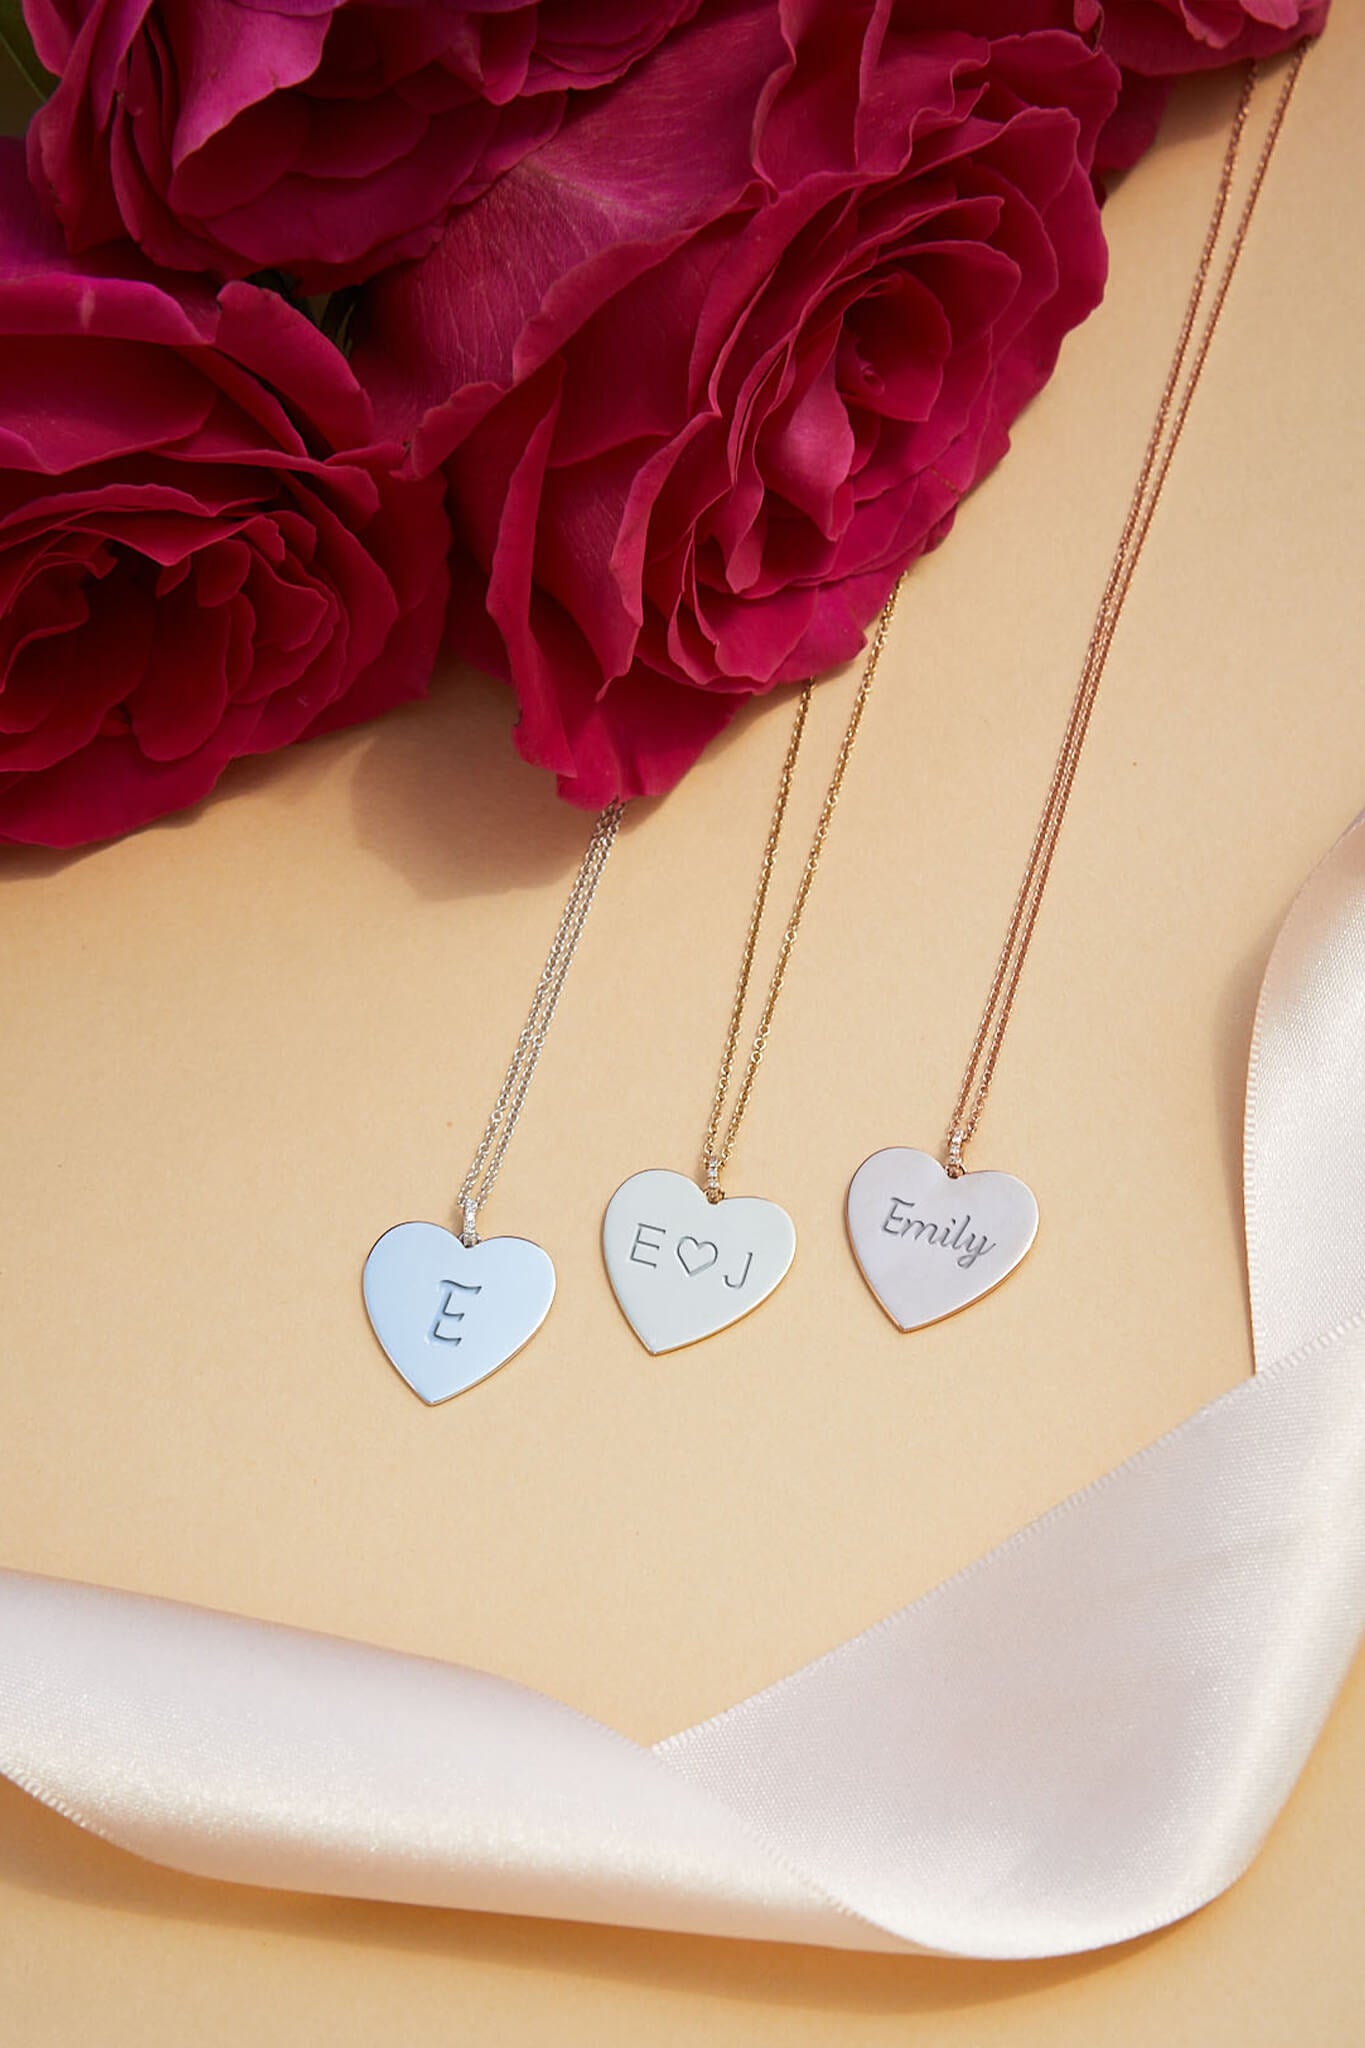 EF Collection 14k white gold, yellow gold, and rose gold jumbo heart necklaces with engraved initials